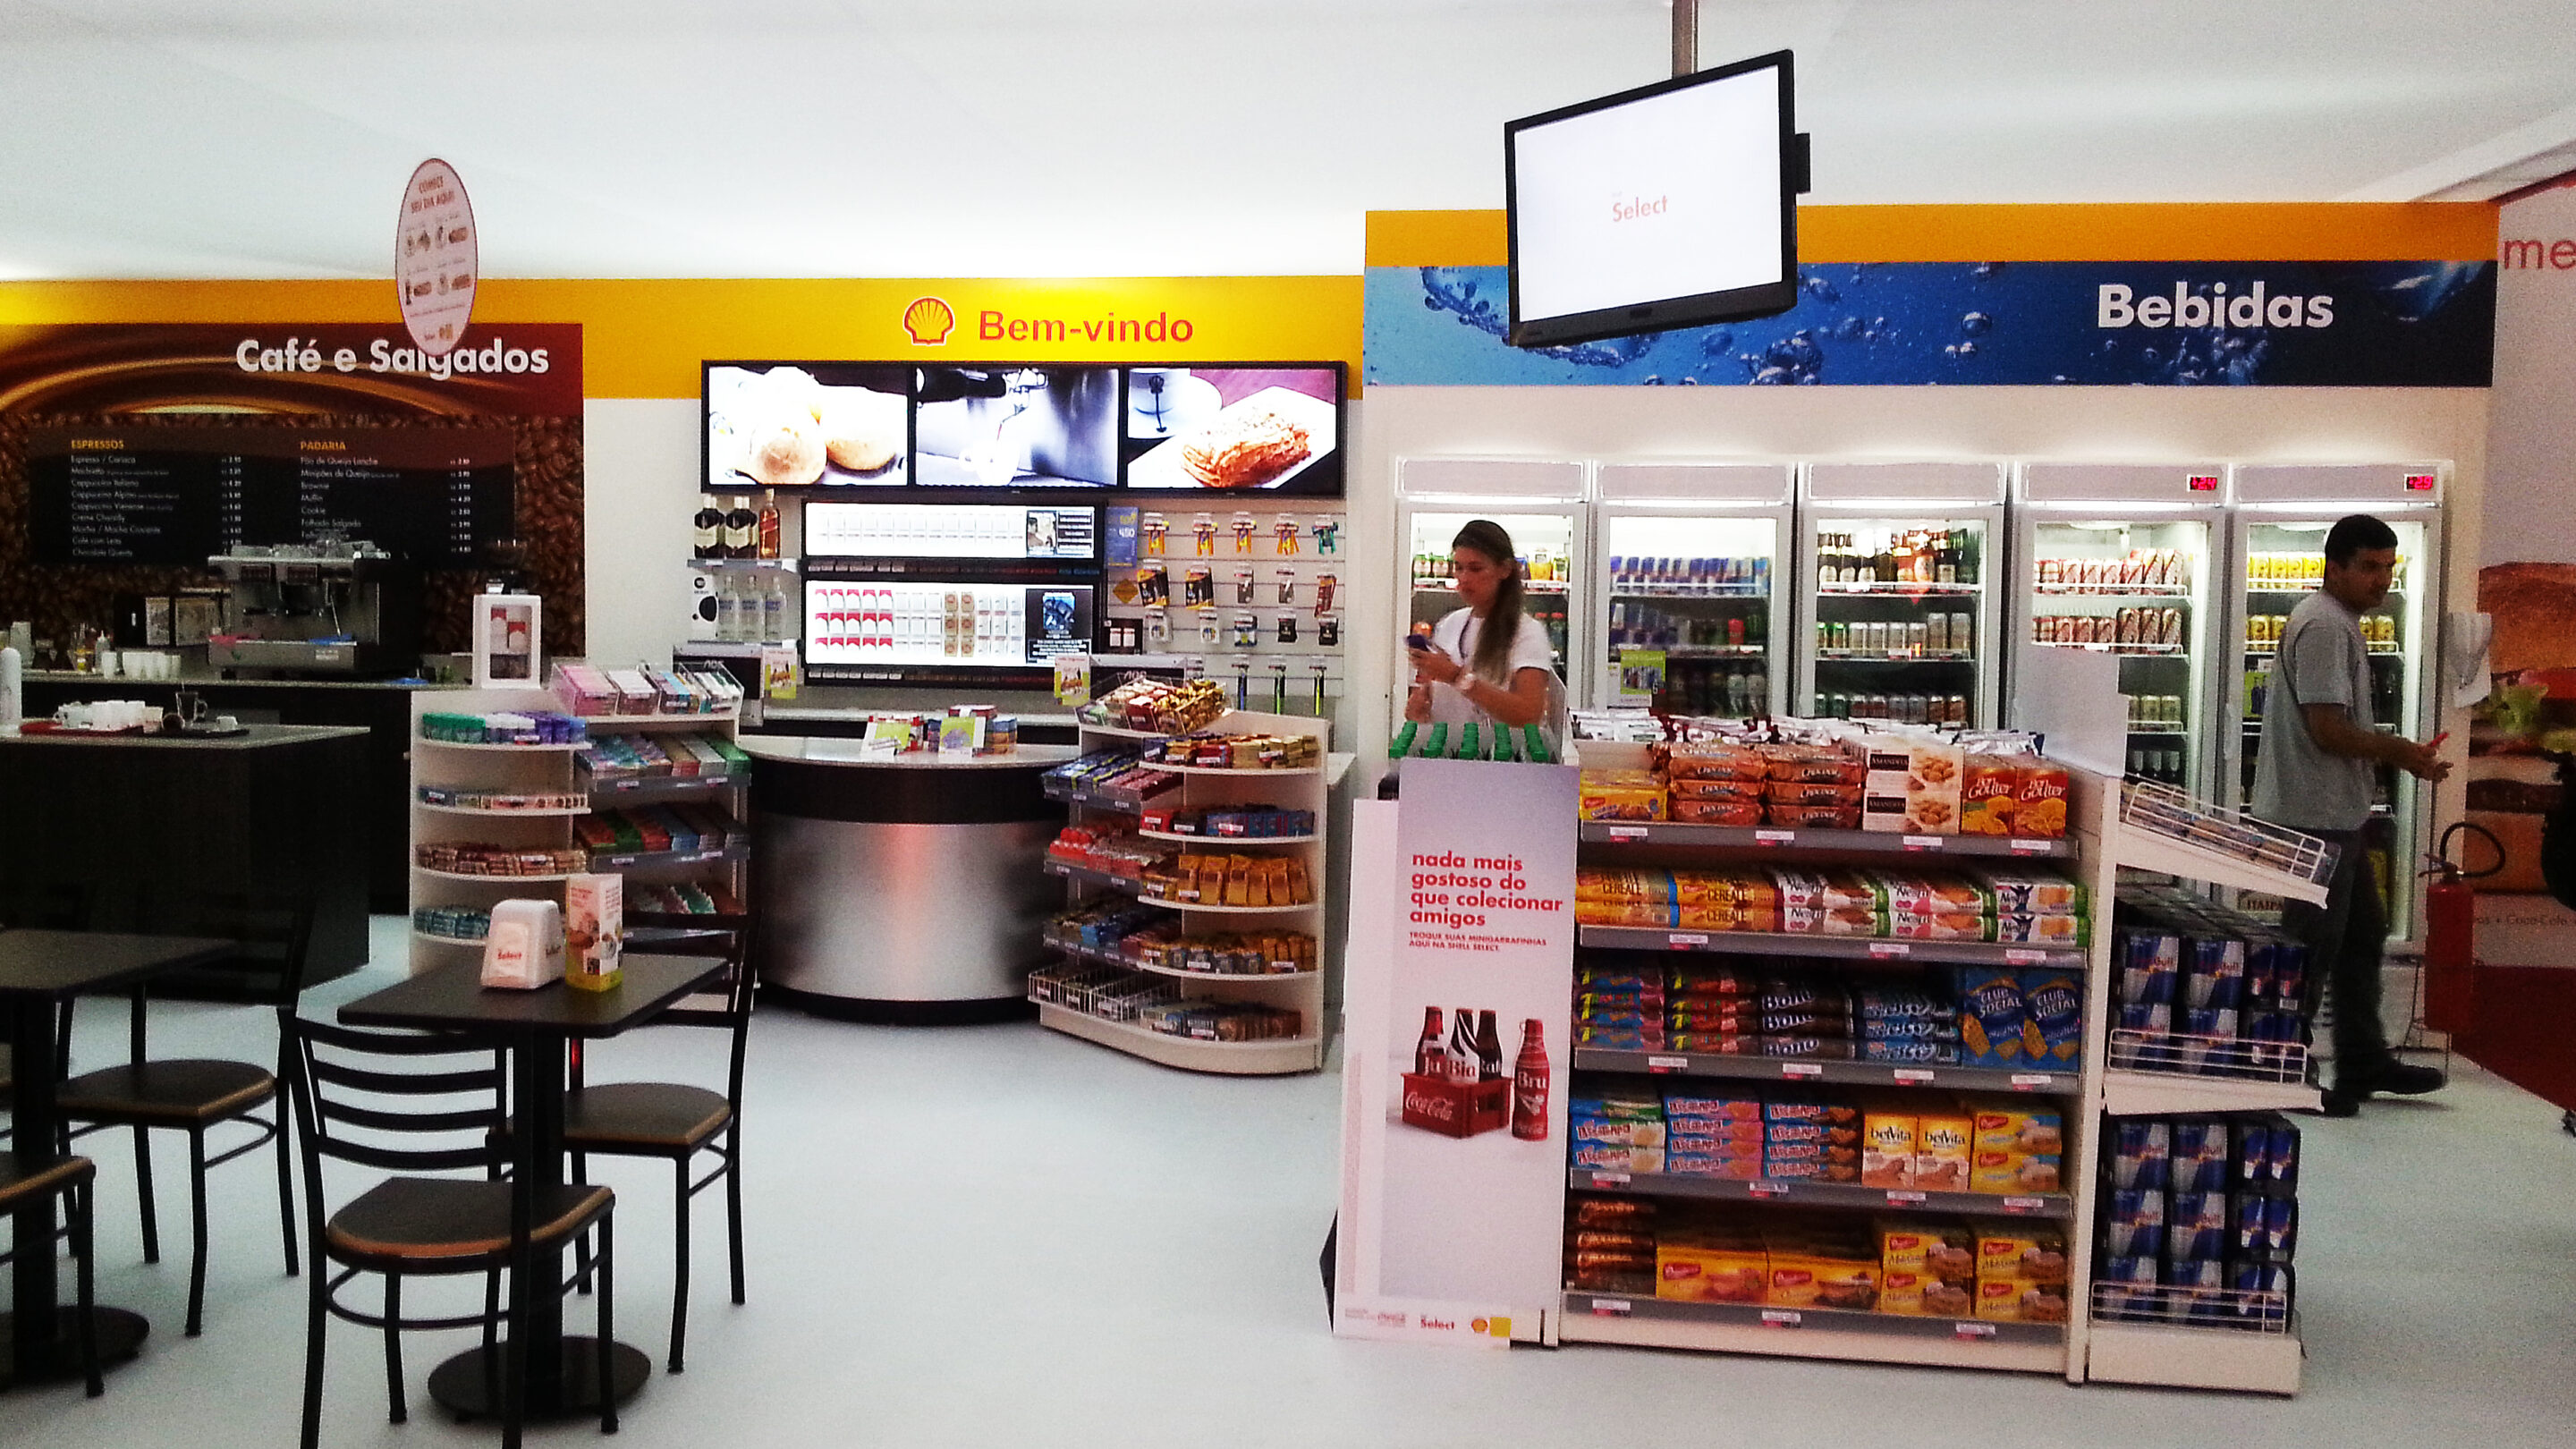 Shell Oil Expanding Successful Digital Signage Installation to 600 Stores Throughout Brazil